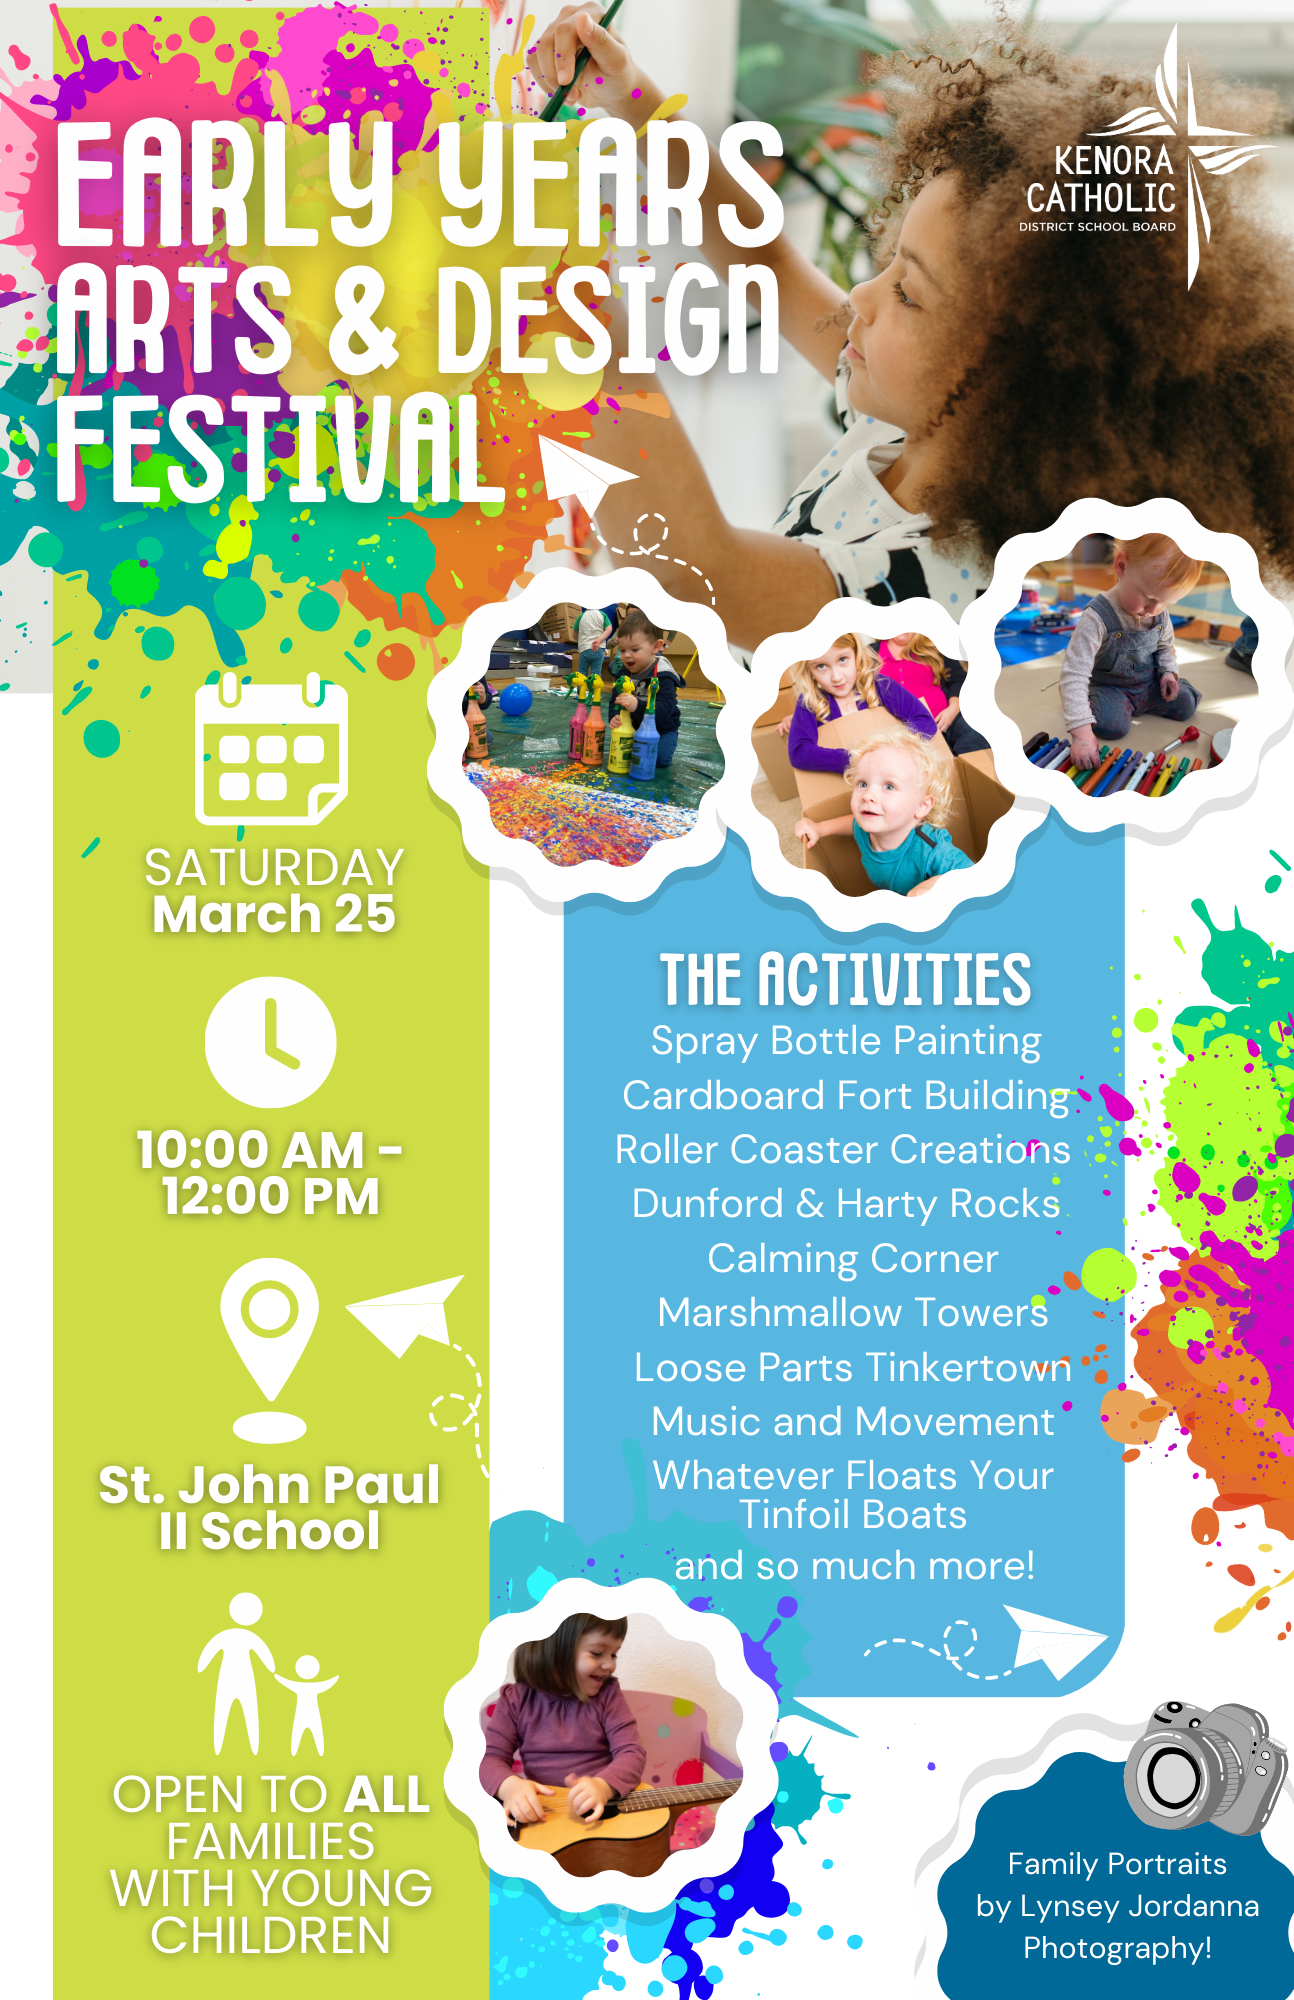 The Early years Arts Festival is on Saturday, March 25